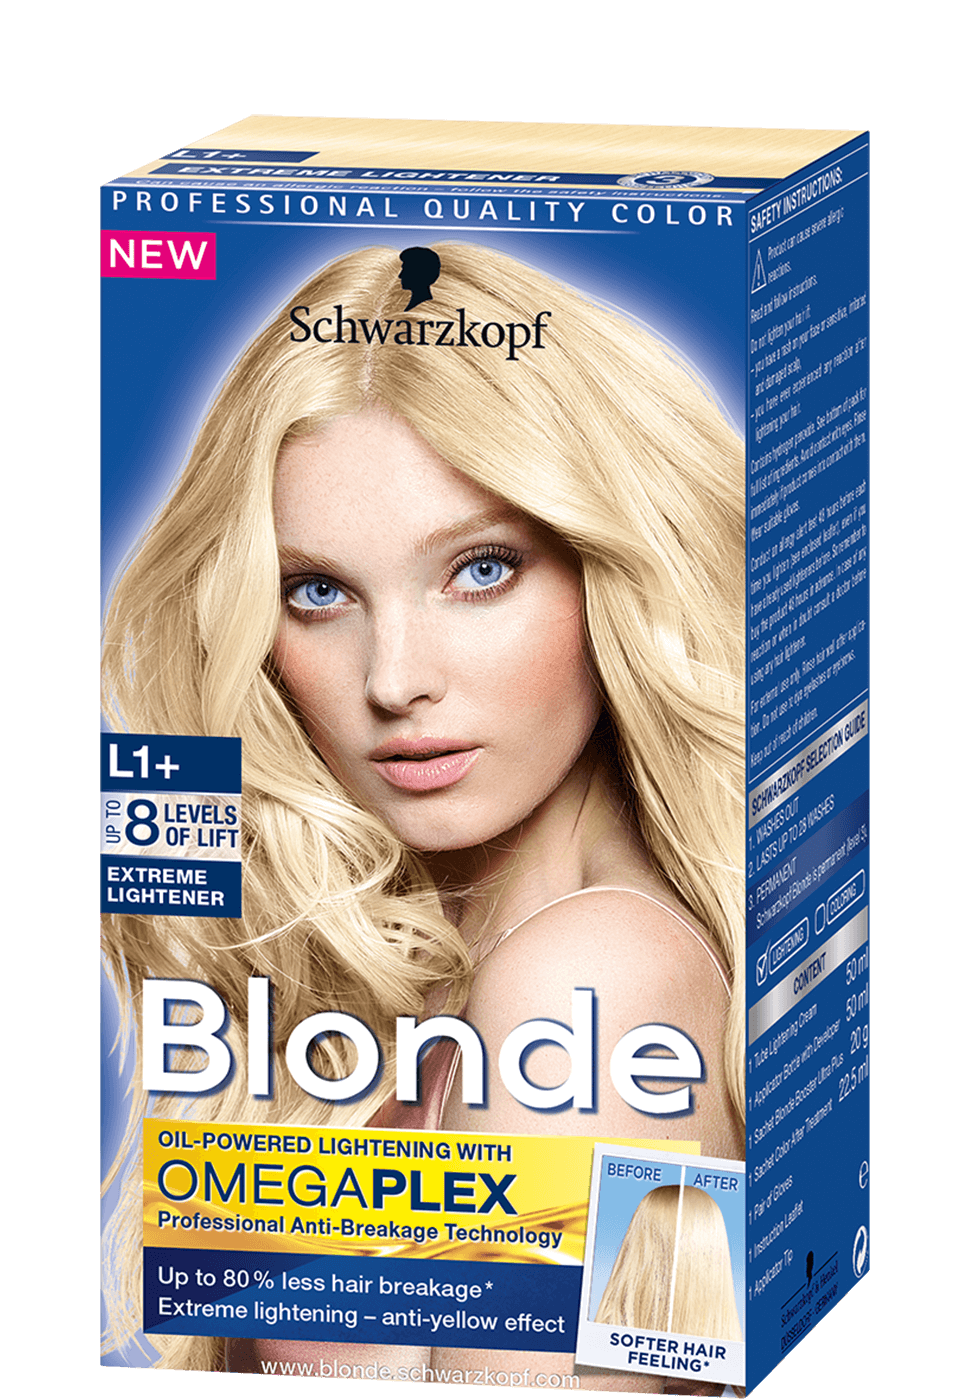 39 Top Pictures How To Lighten Already Blonde Hair / Fabulous Blonde Hair Color Shades How To Go Blonde Matrix